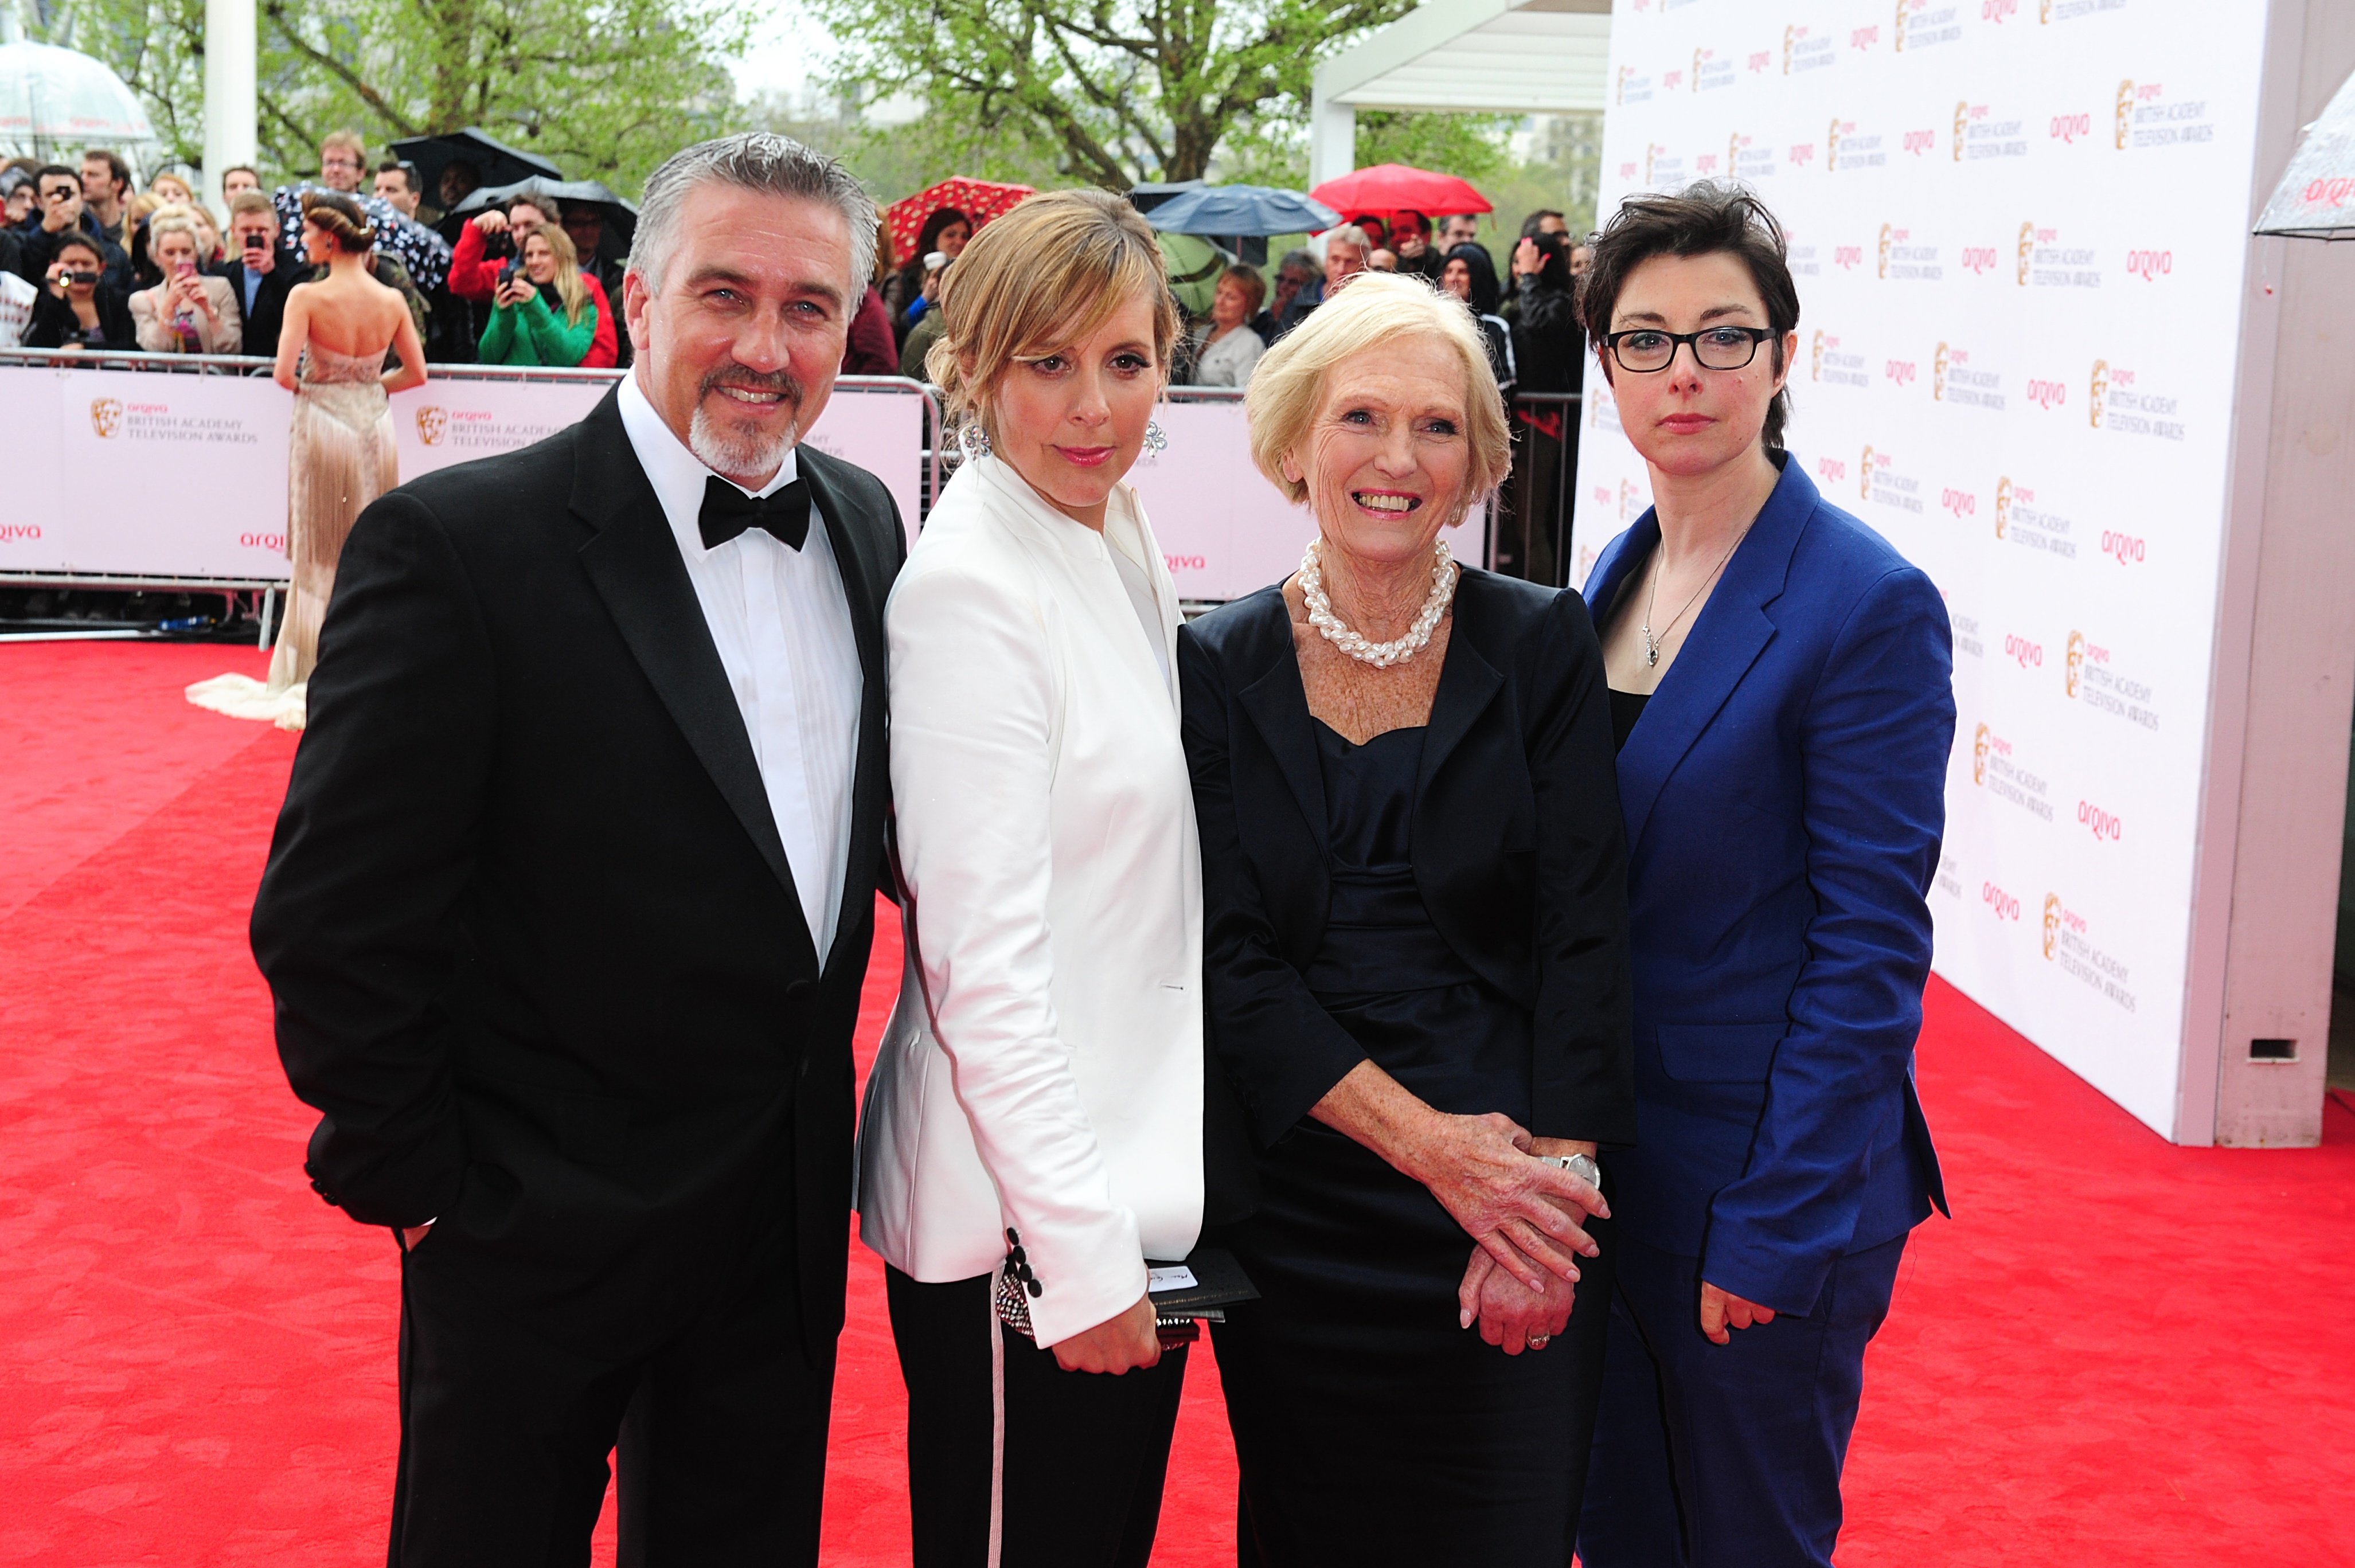 Paul with his former 'Bake Off' colleagues<i> (l-r)</i>&nbsp;Mel Giedroyc, Mary Berry and Sue Perkins